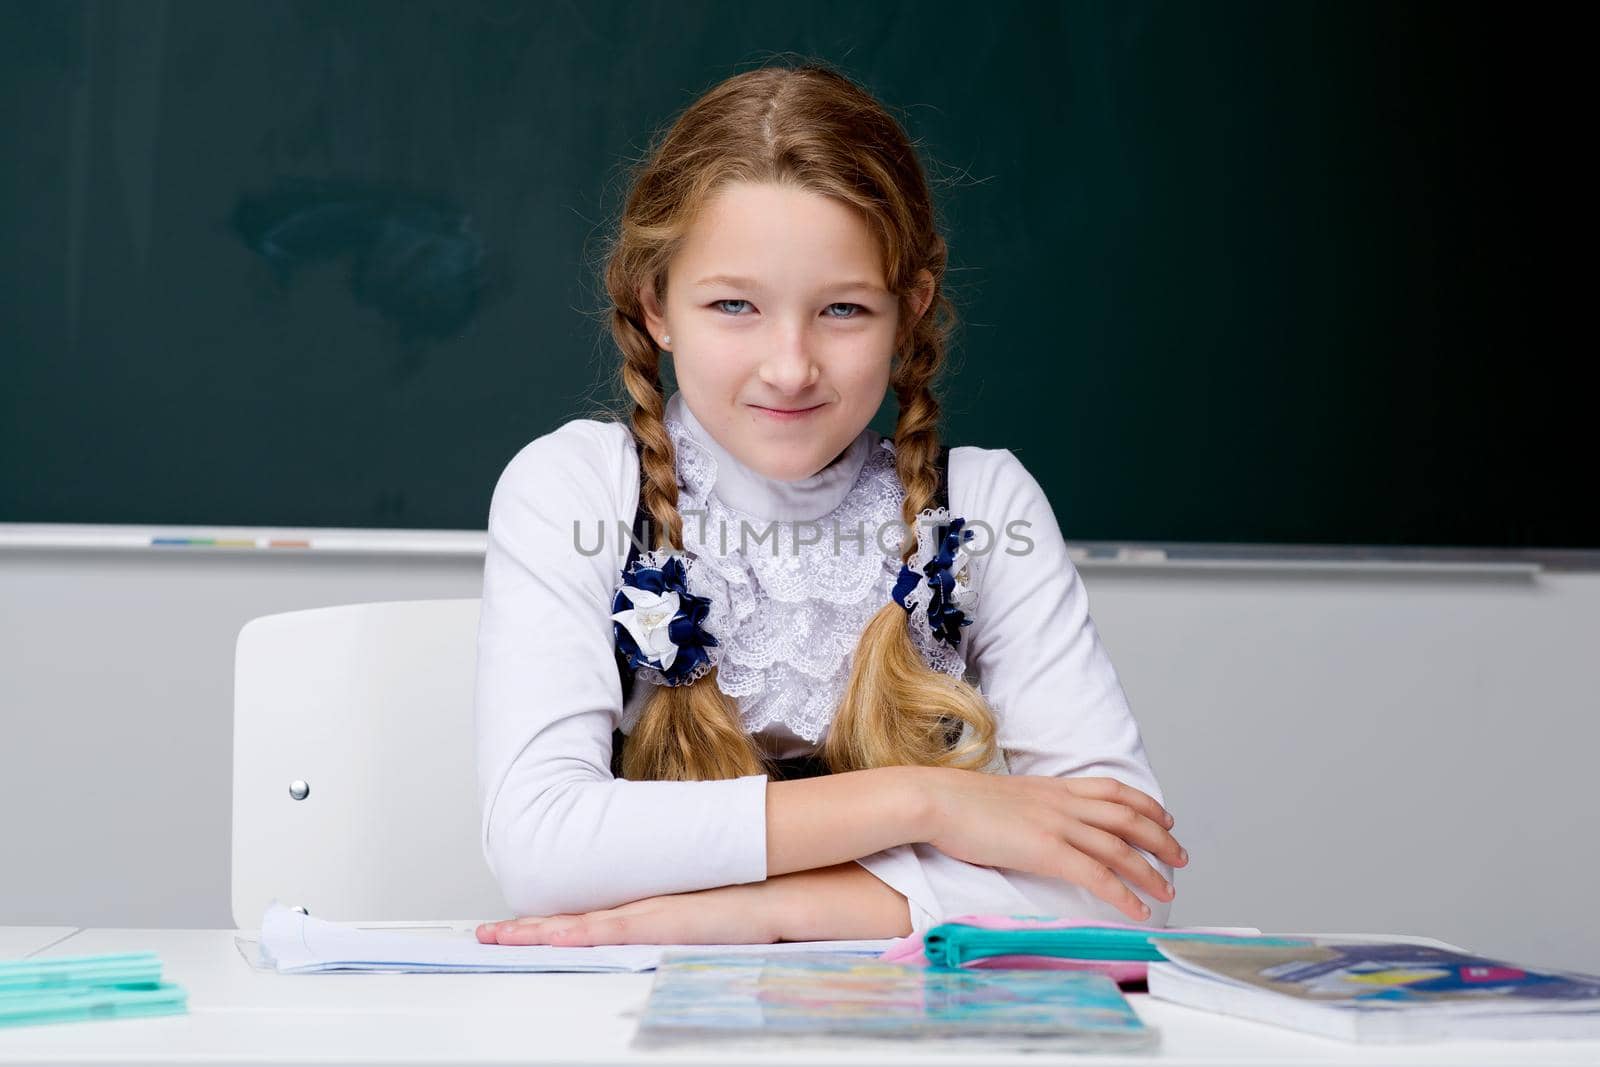 Portrait of a cute schoolgirl. A pensive, tired girl sits at a desk. Elementary school student posing in front of the blackboard. Back to school, education concept.